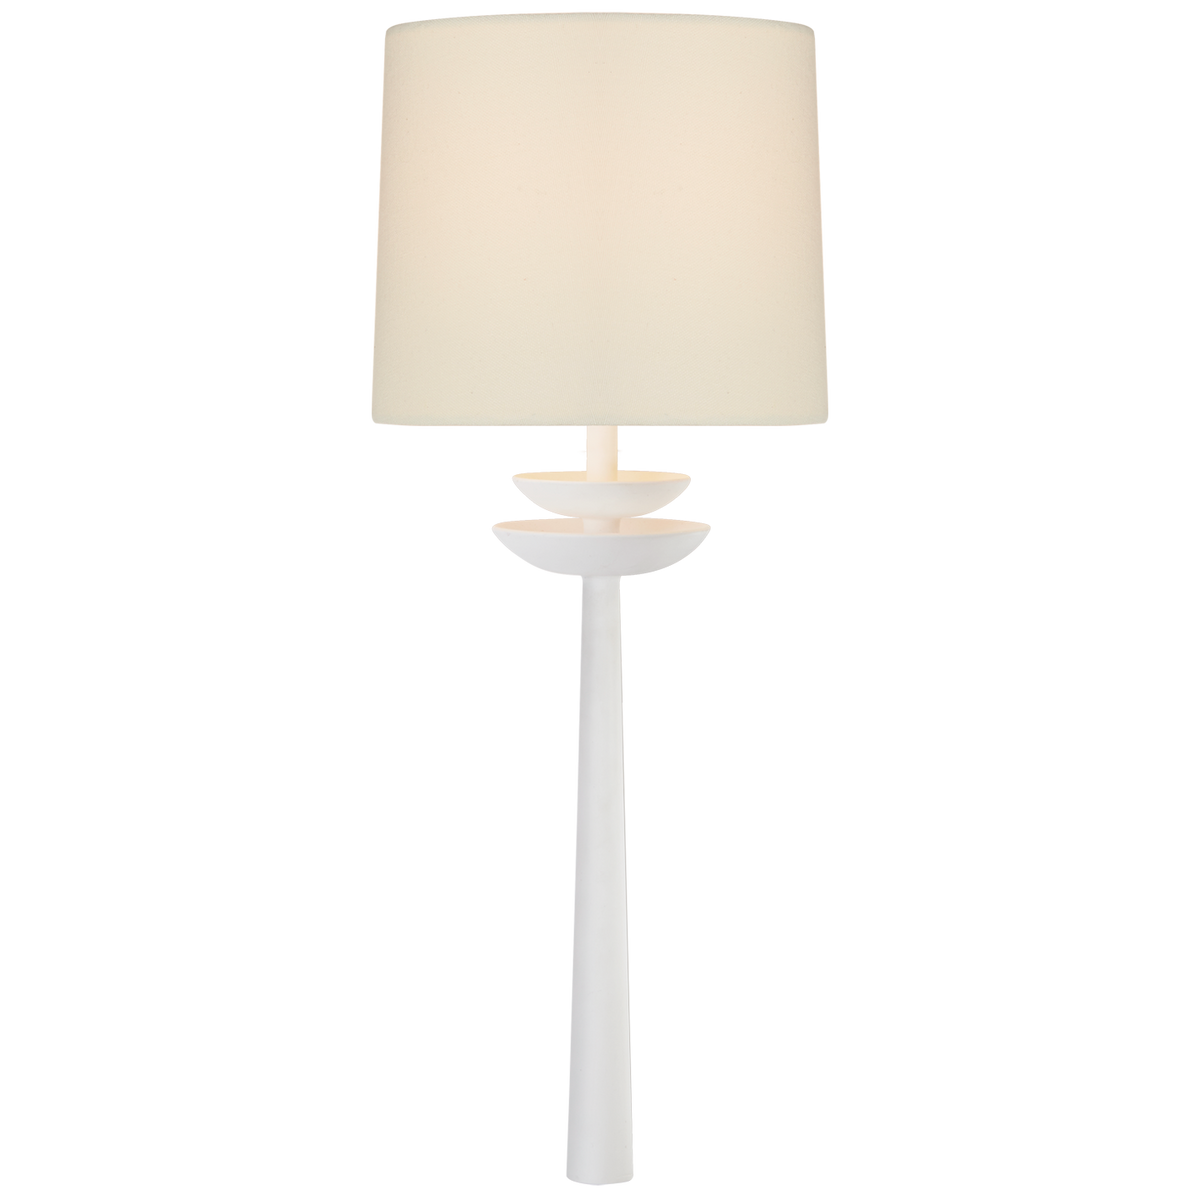 Beaumont Sconce Medium Tail - Matte White with Linen Shade